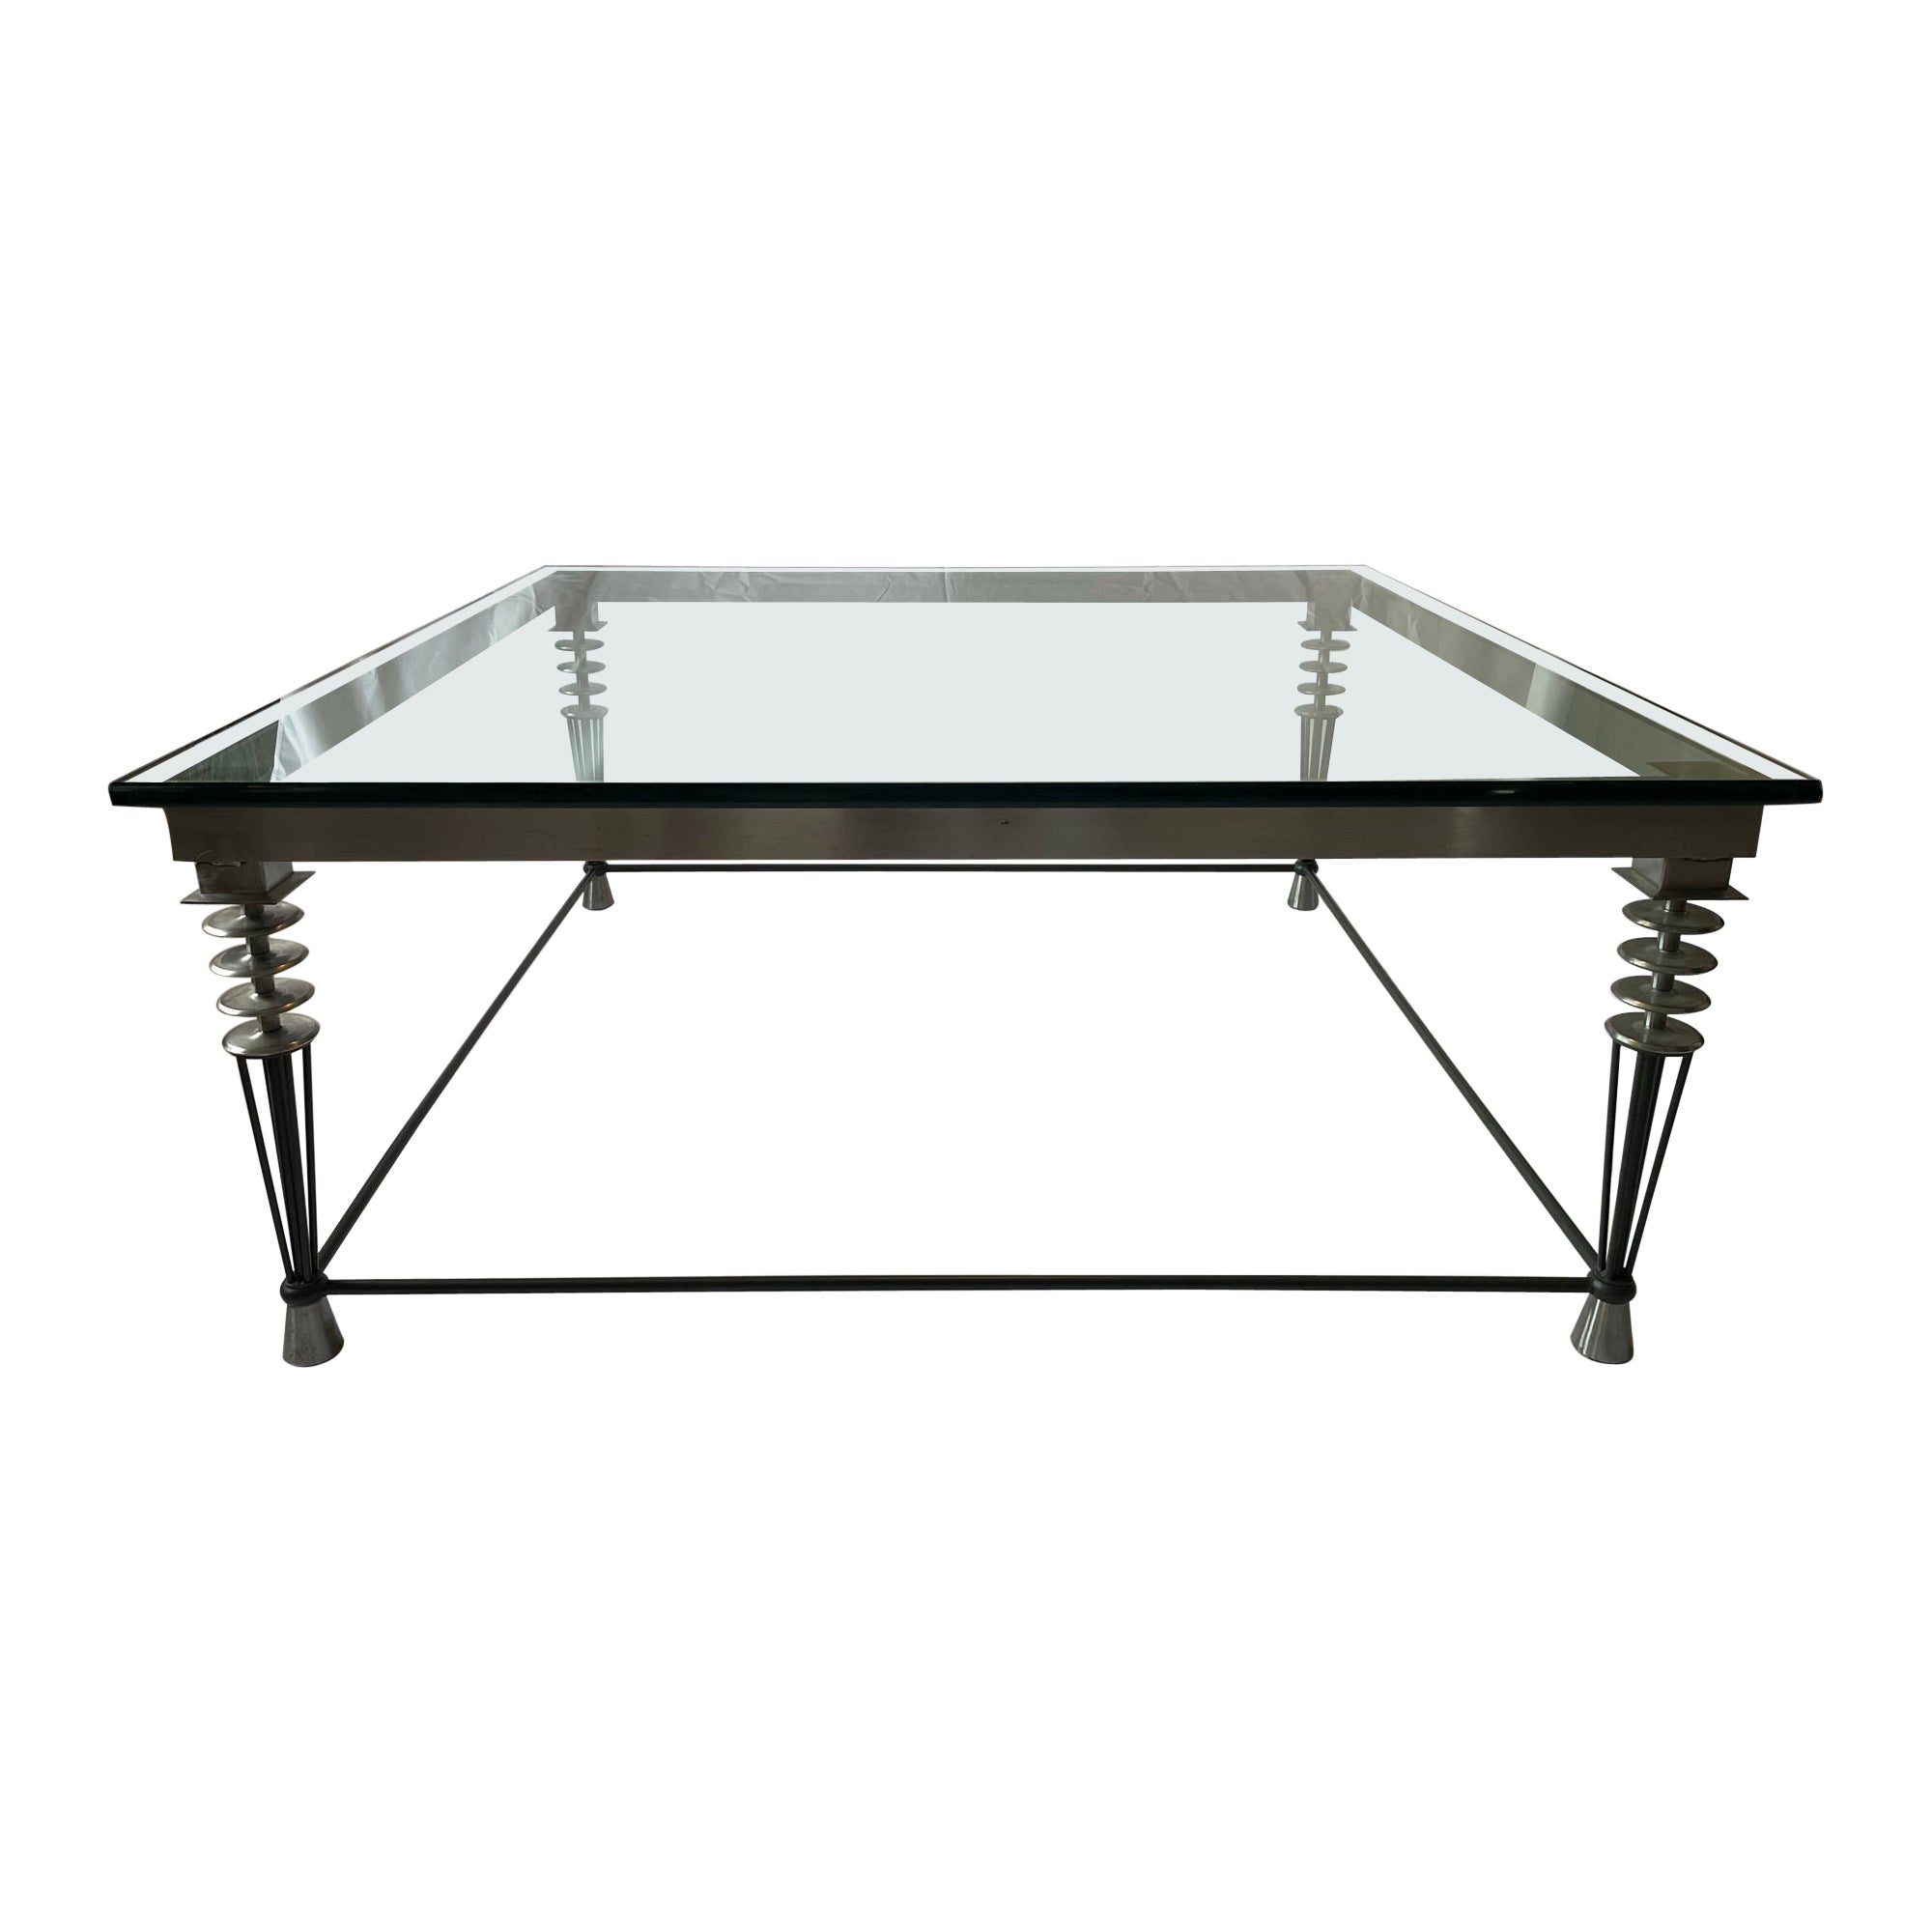 Larry Laslo for Directional Glass Coffee Table